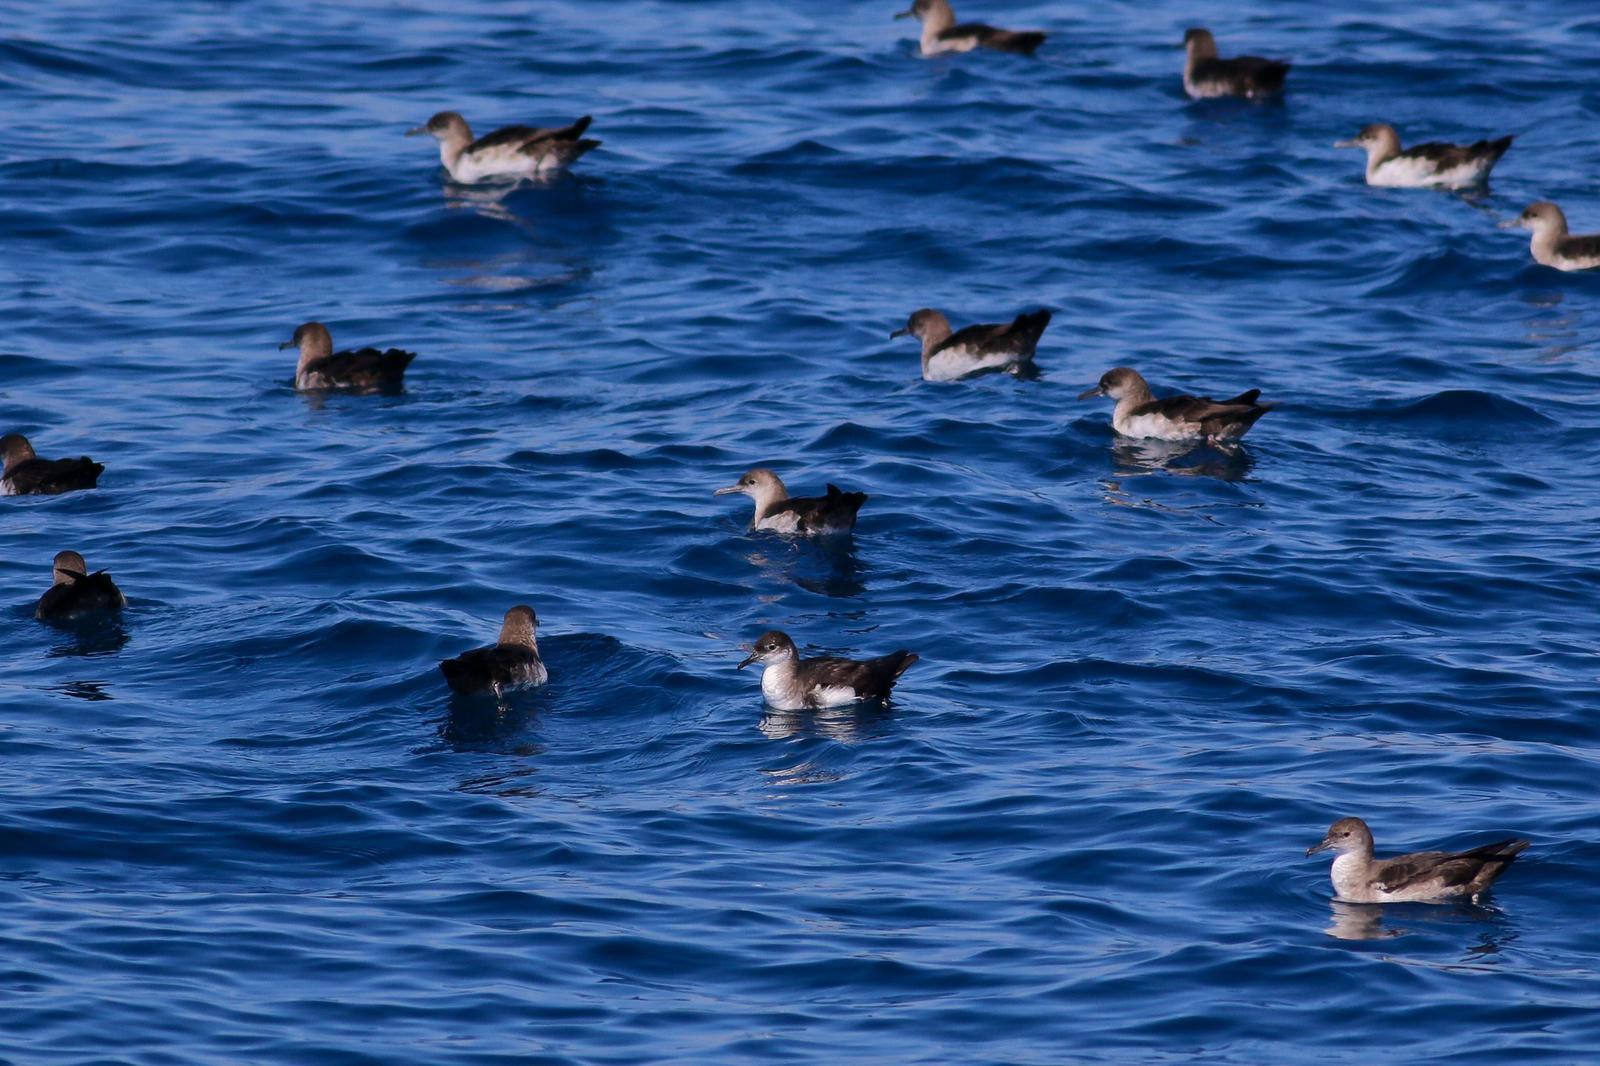 Manx Shearwater Photo by Tom Ford-Hutchinson